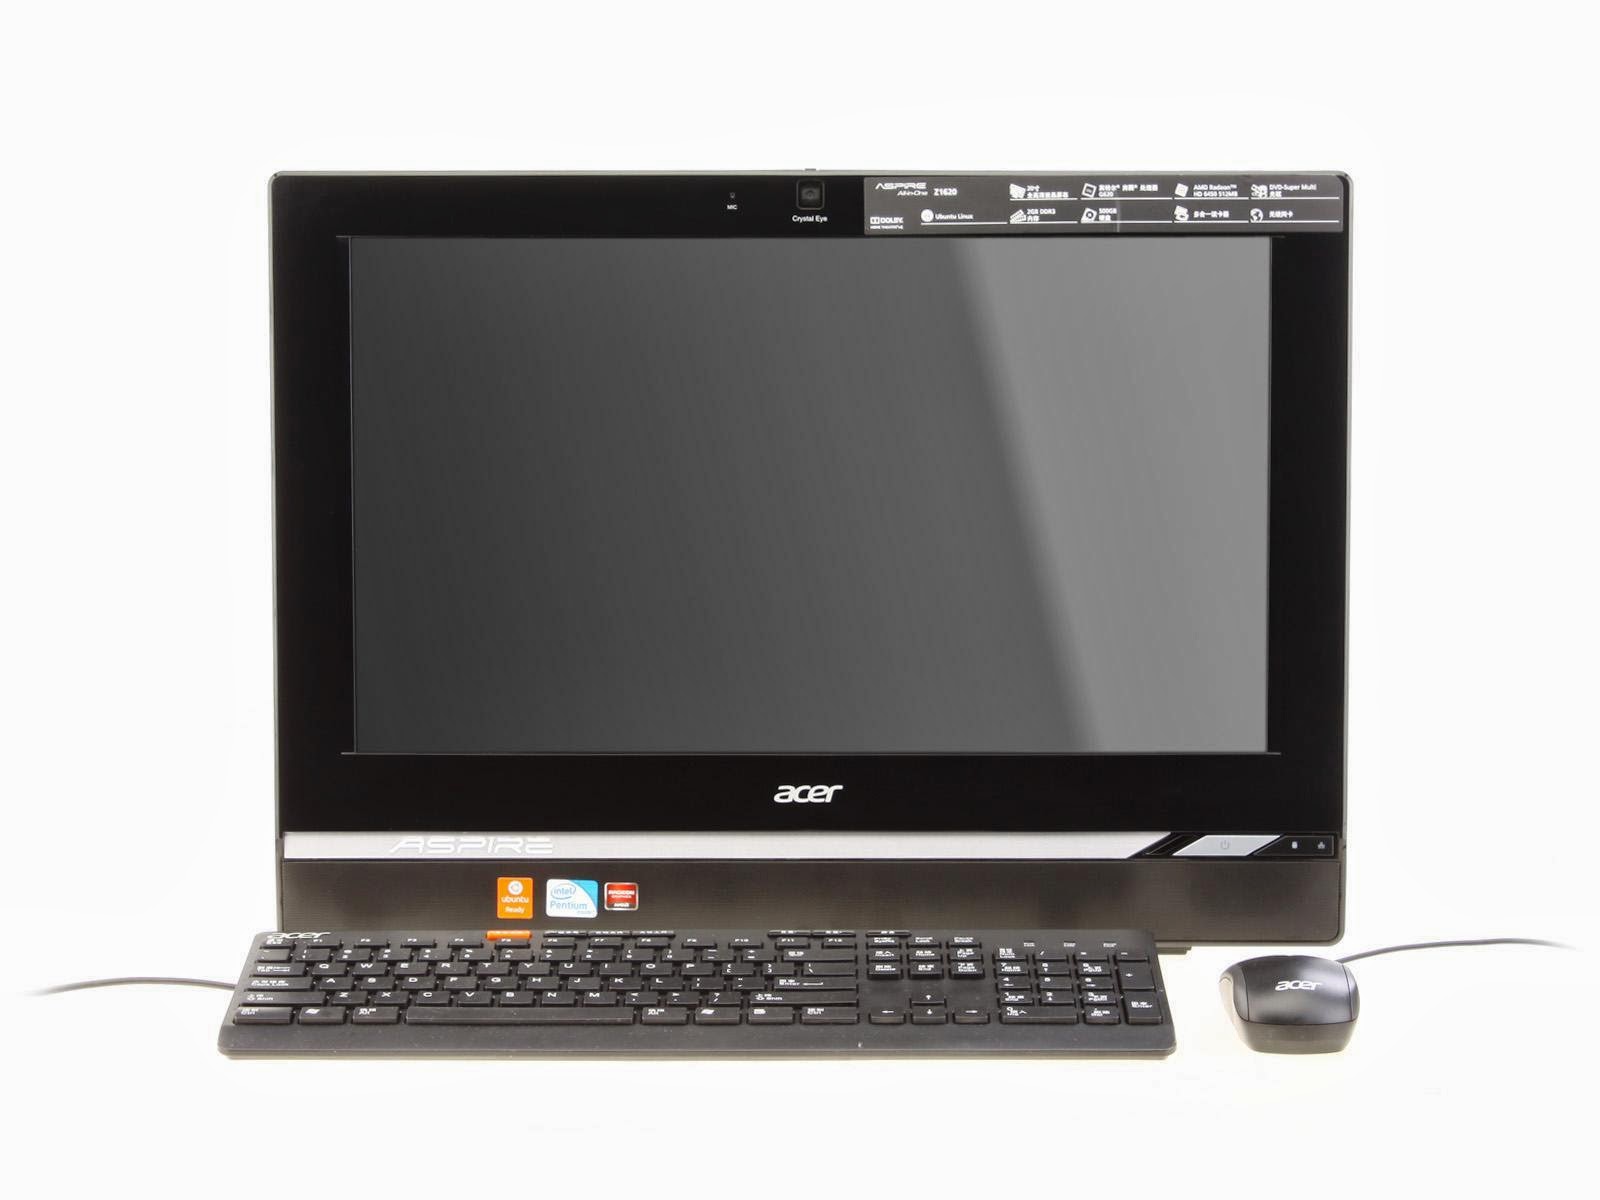 Acer All-in-one Aspire Z1620 Drivers for Windows 7, 8 ...